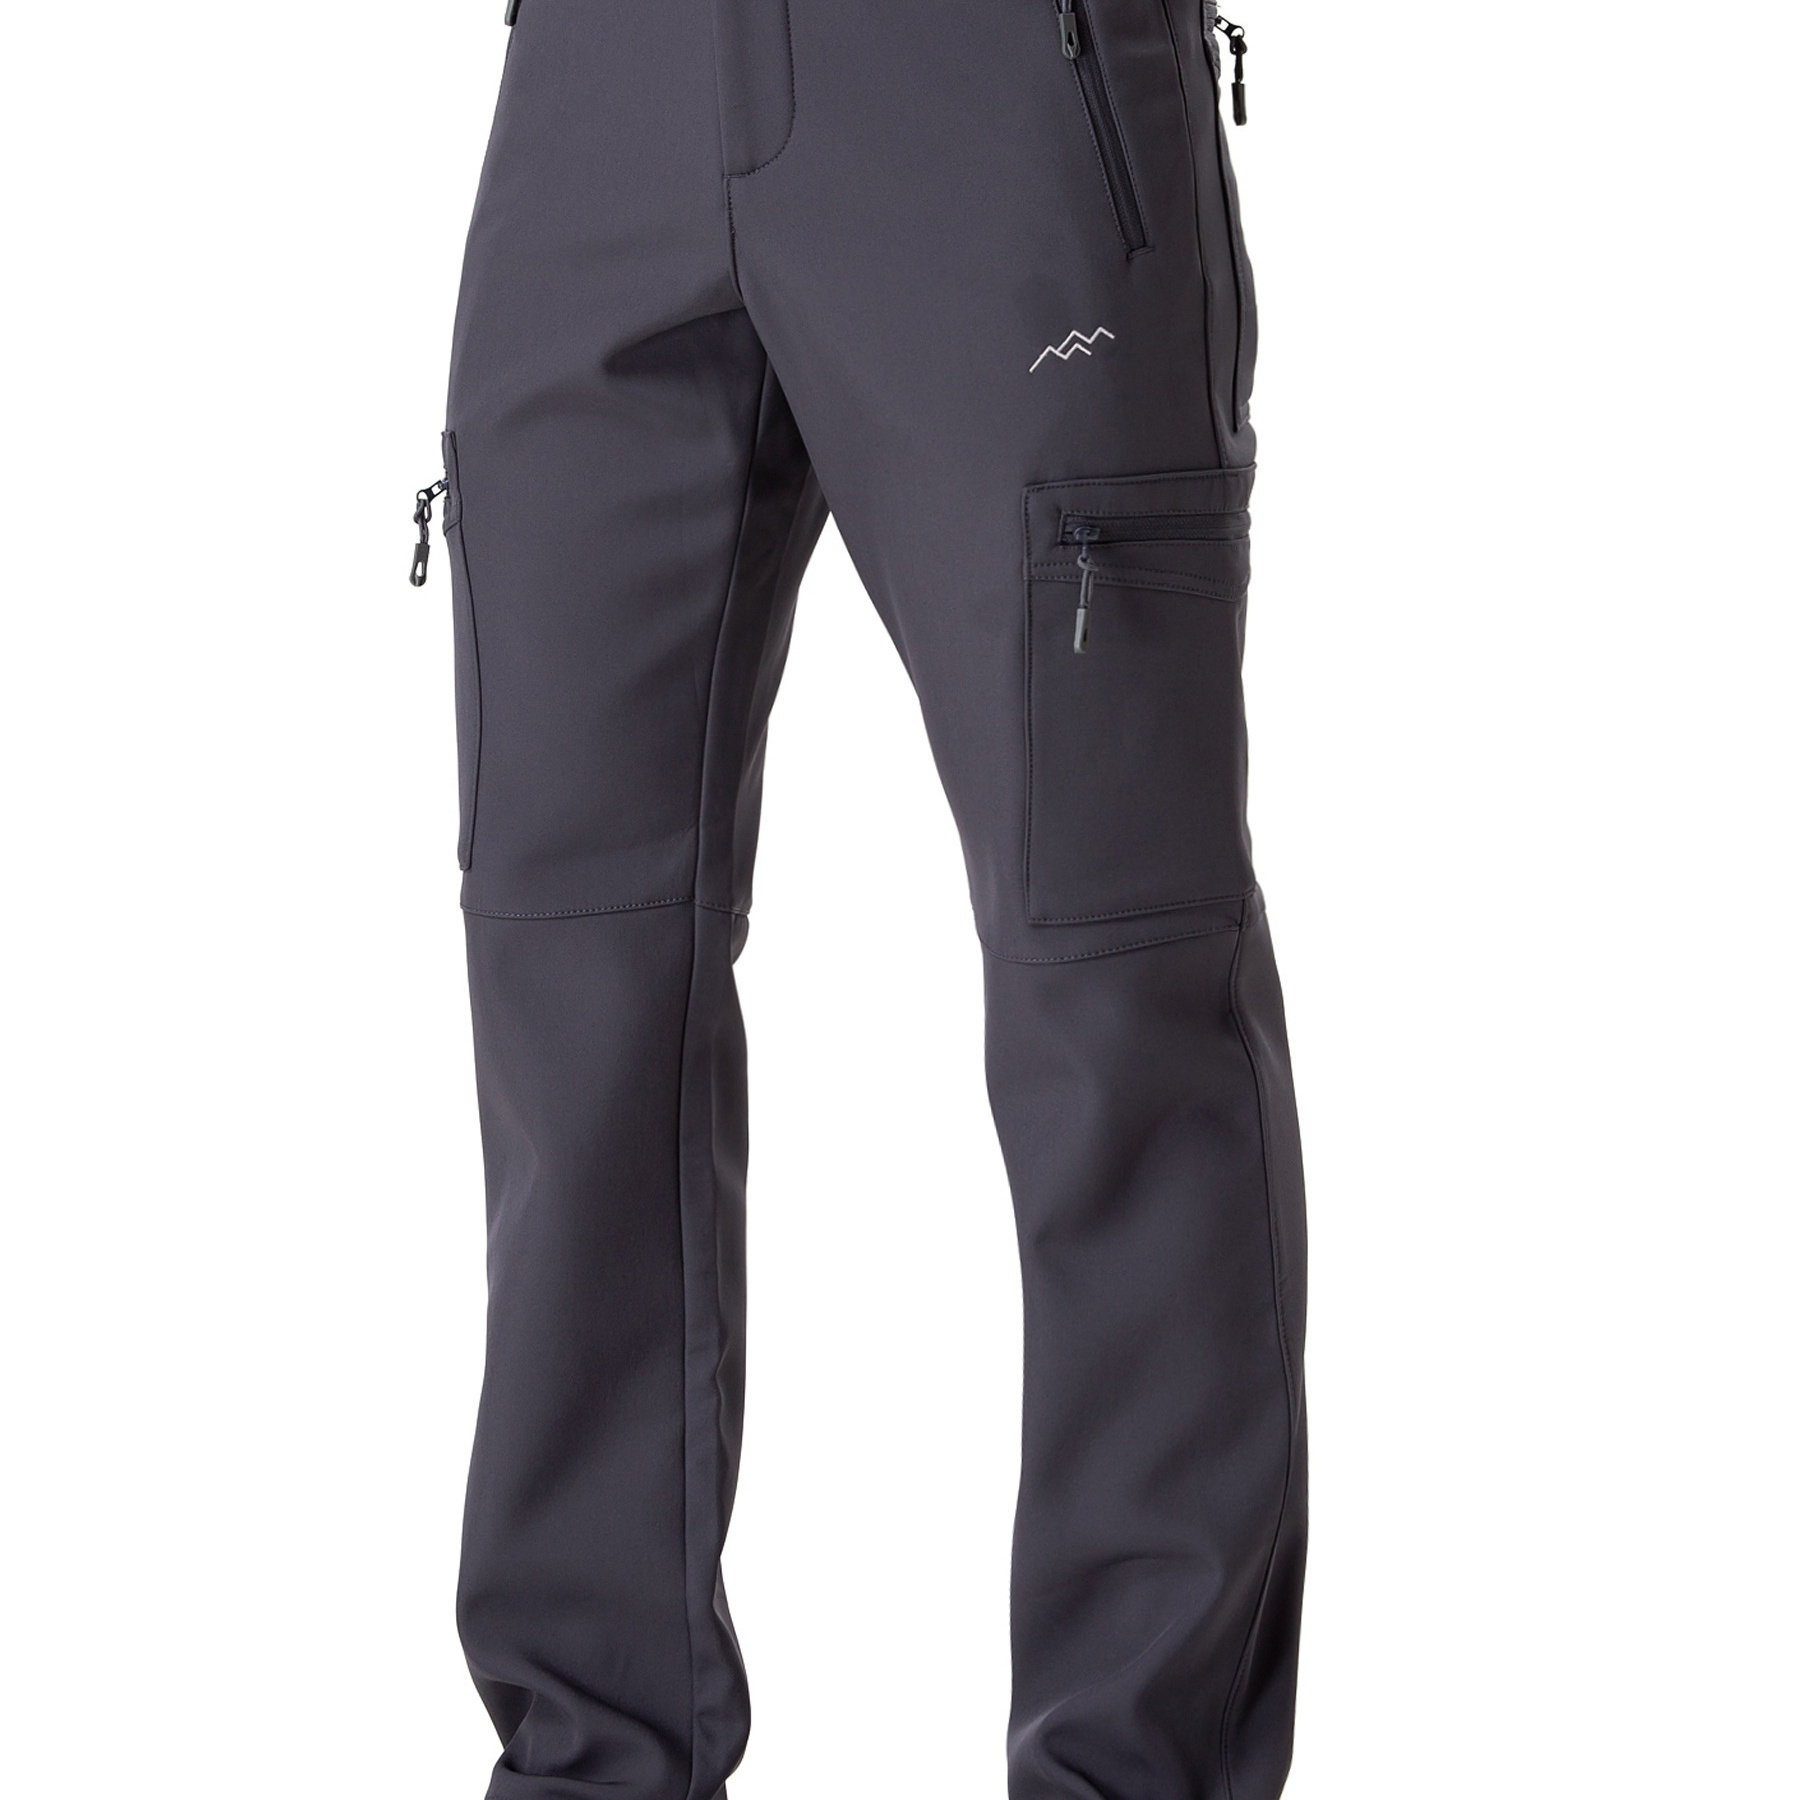 Men's Waterproof Thermal Ski Pants: Perfect For Outdoor Activities & Climbing - Zipper Pockets Included!